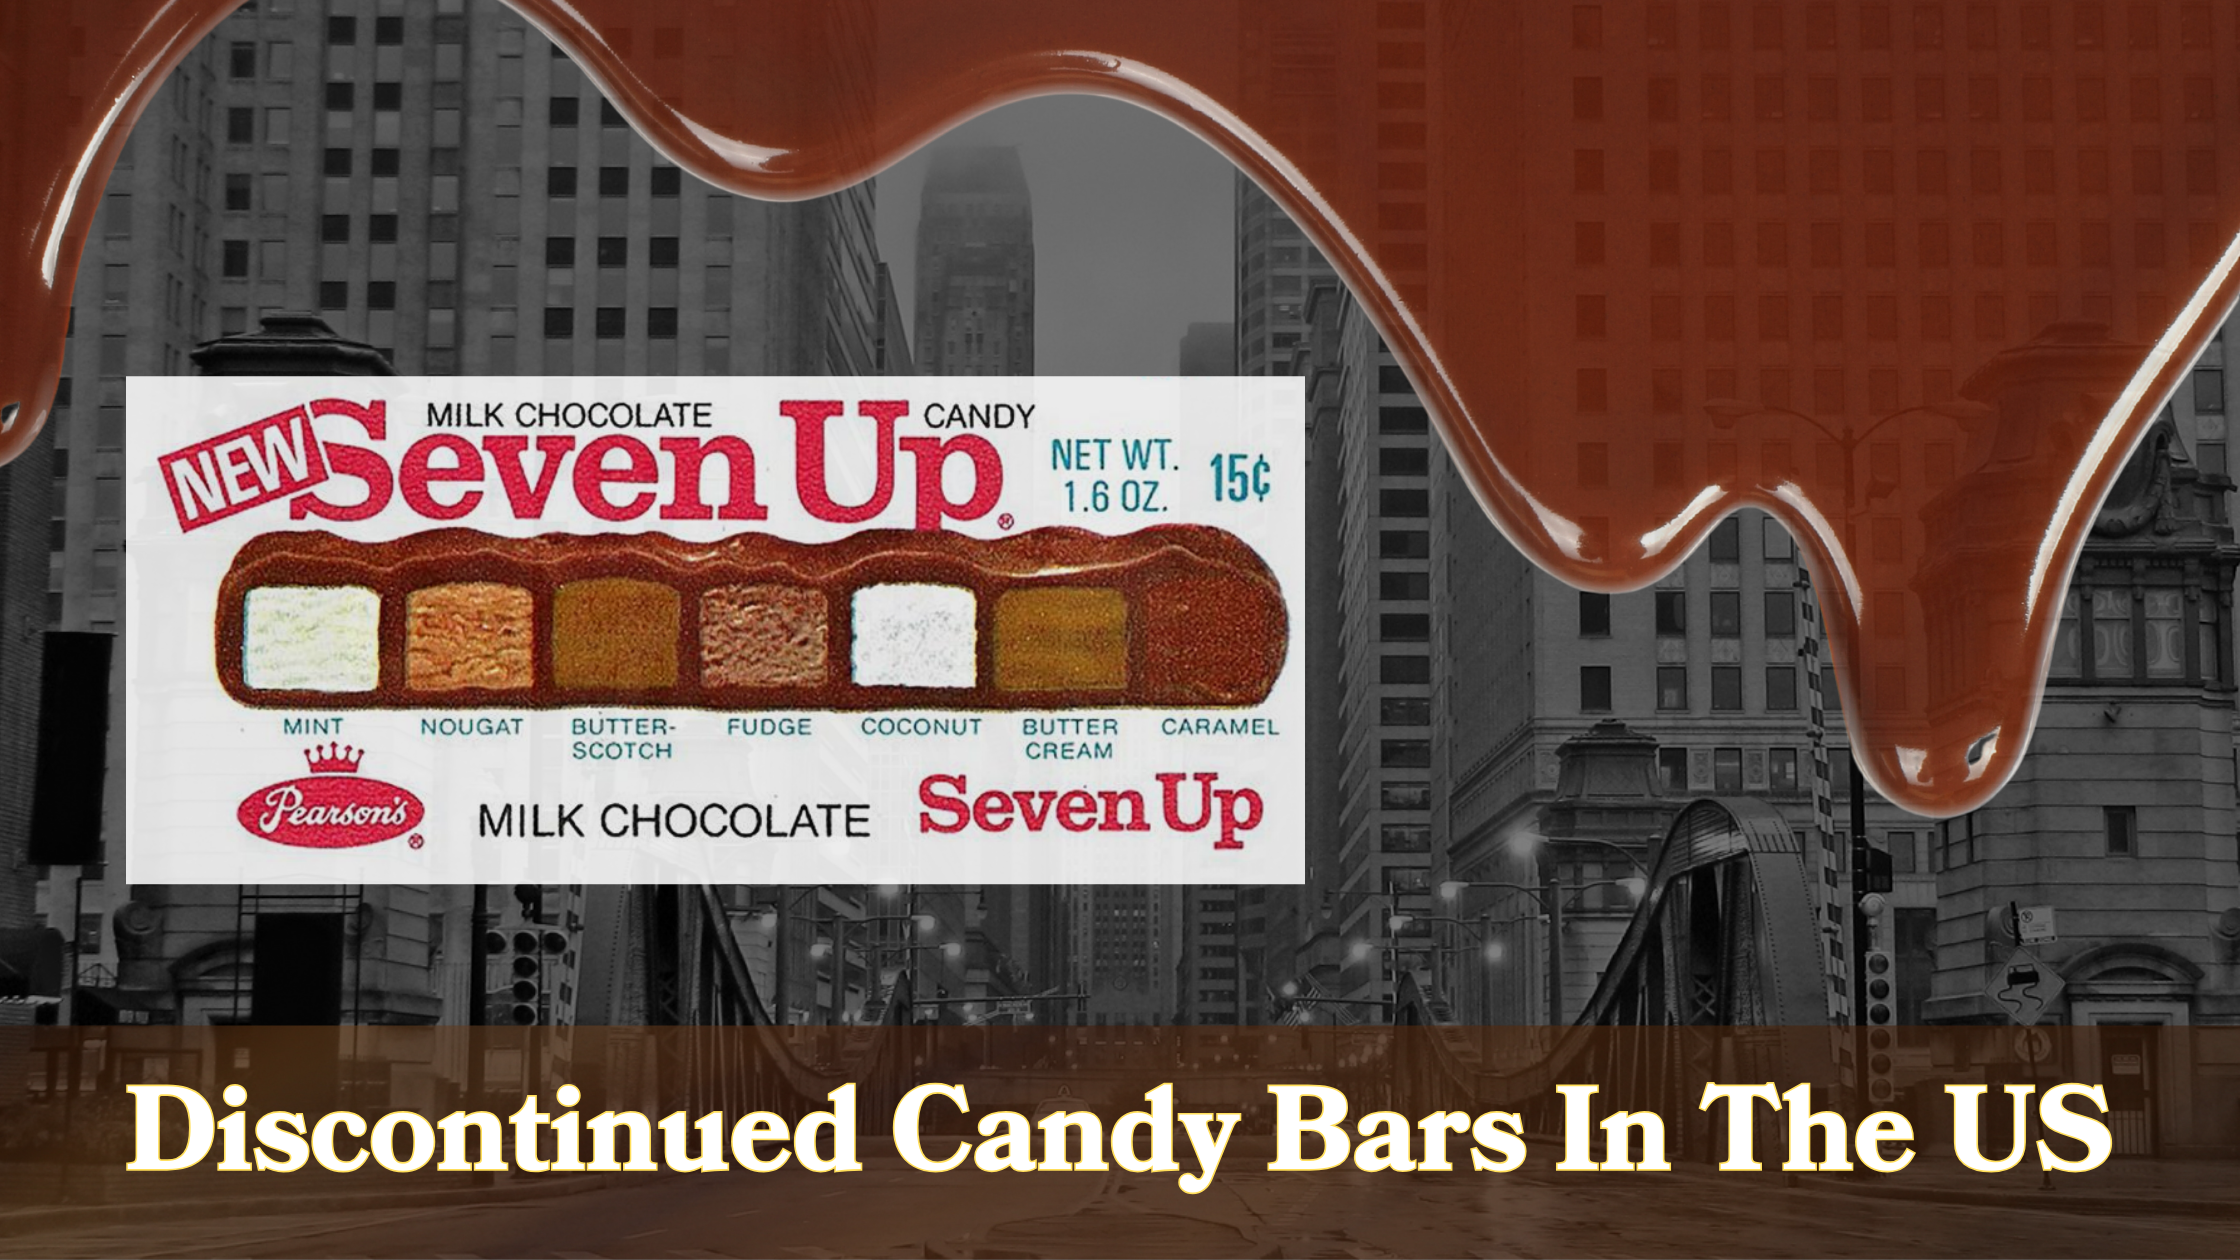 10 Discontinued Candy Bars in the U.S. That We Still Miss Today